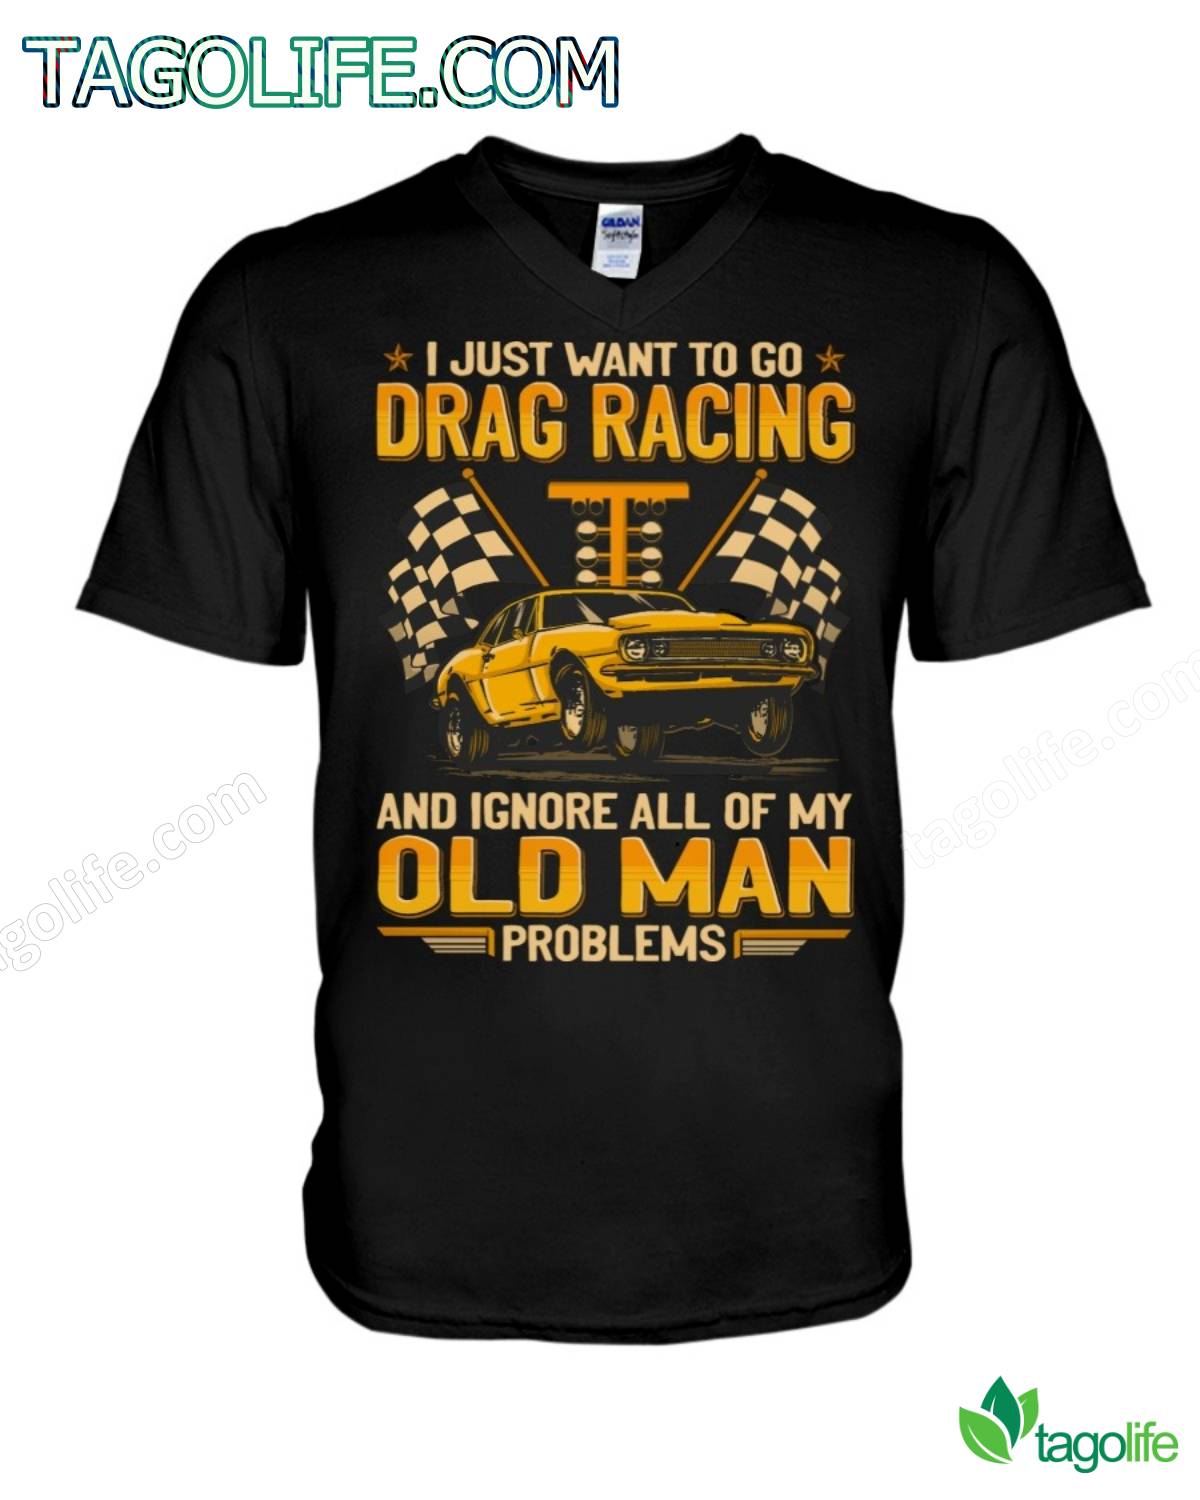 I Just Want To Go Drag Racing And Ignore All Of My Old Man Problems T-Shirt